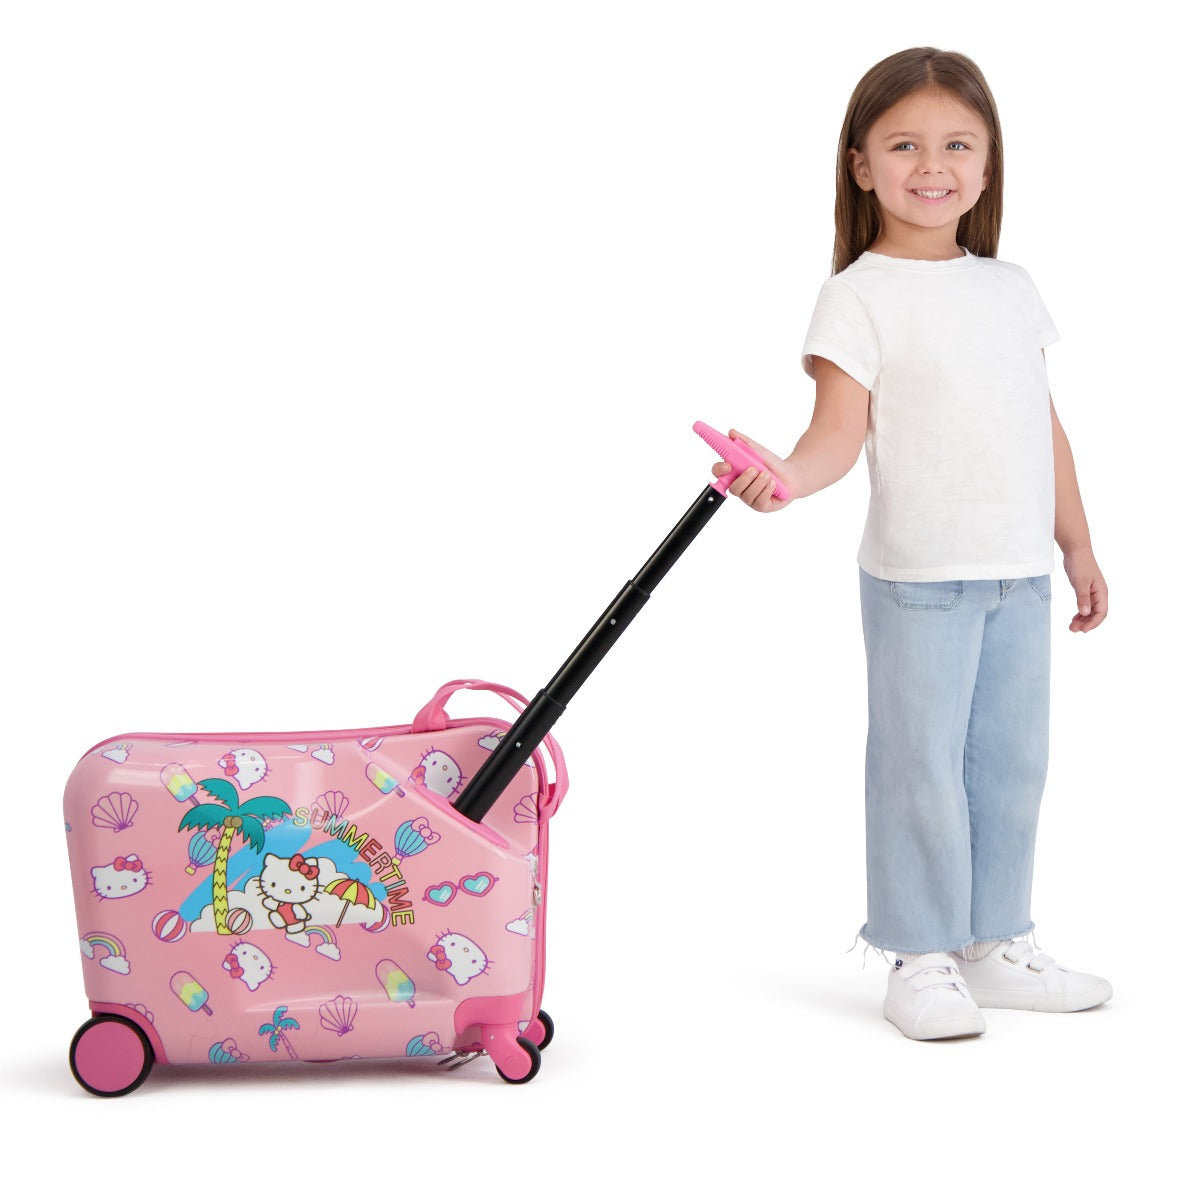 Pink Hello Kitty Summertime Ride-on 14.5 inch spinner suitcase for traveling kids